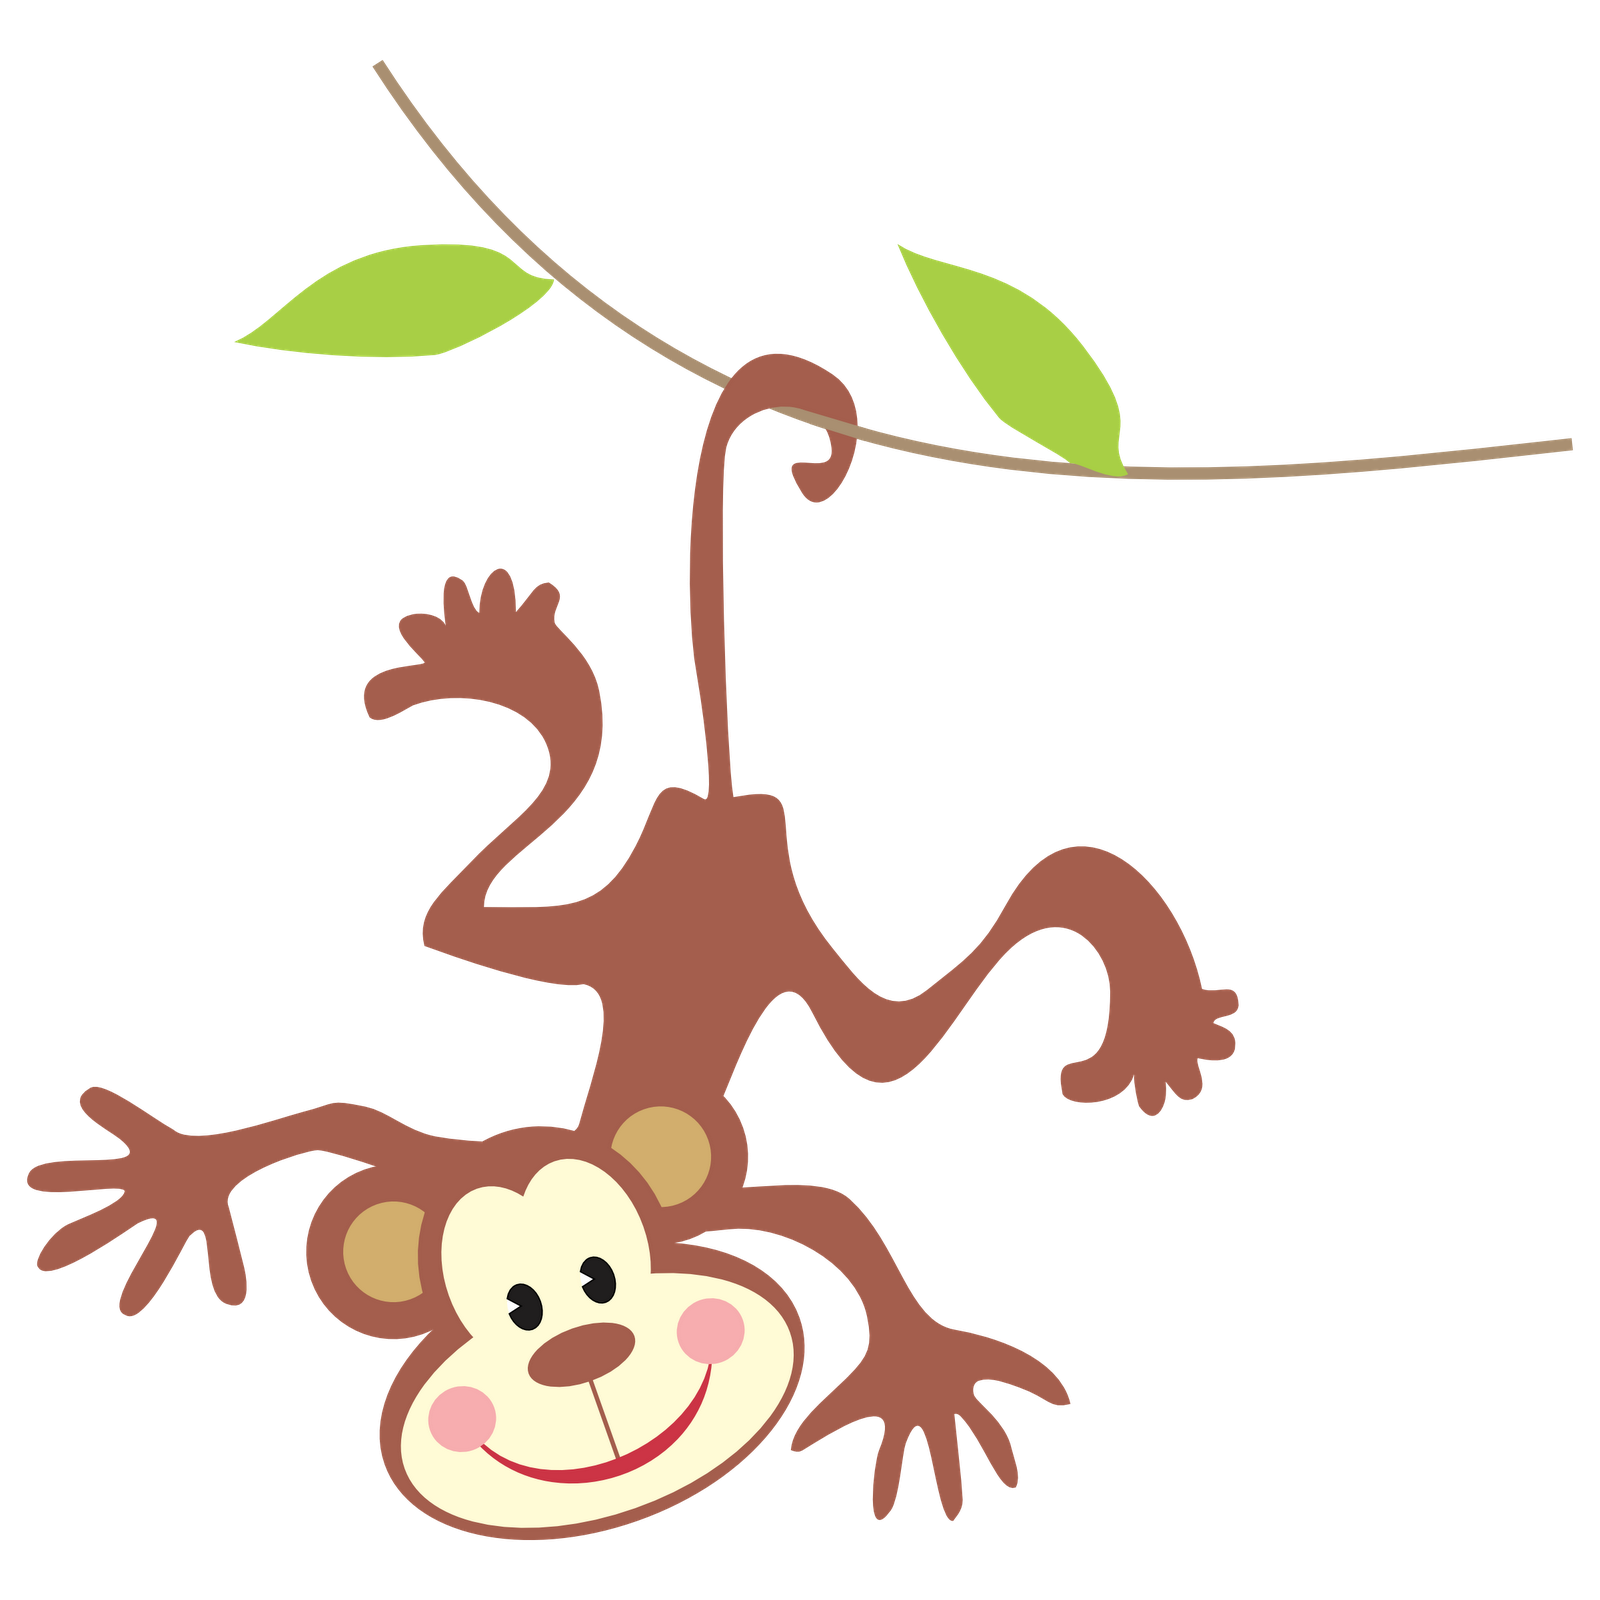 monkey in a tree clipart - photo #43